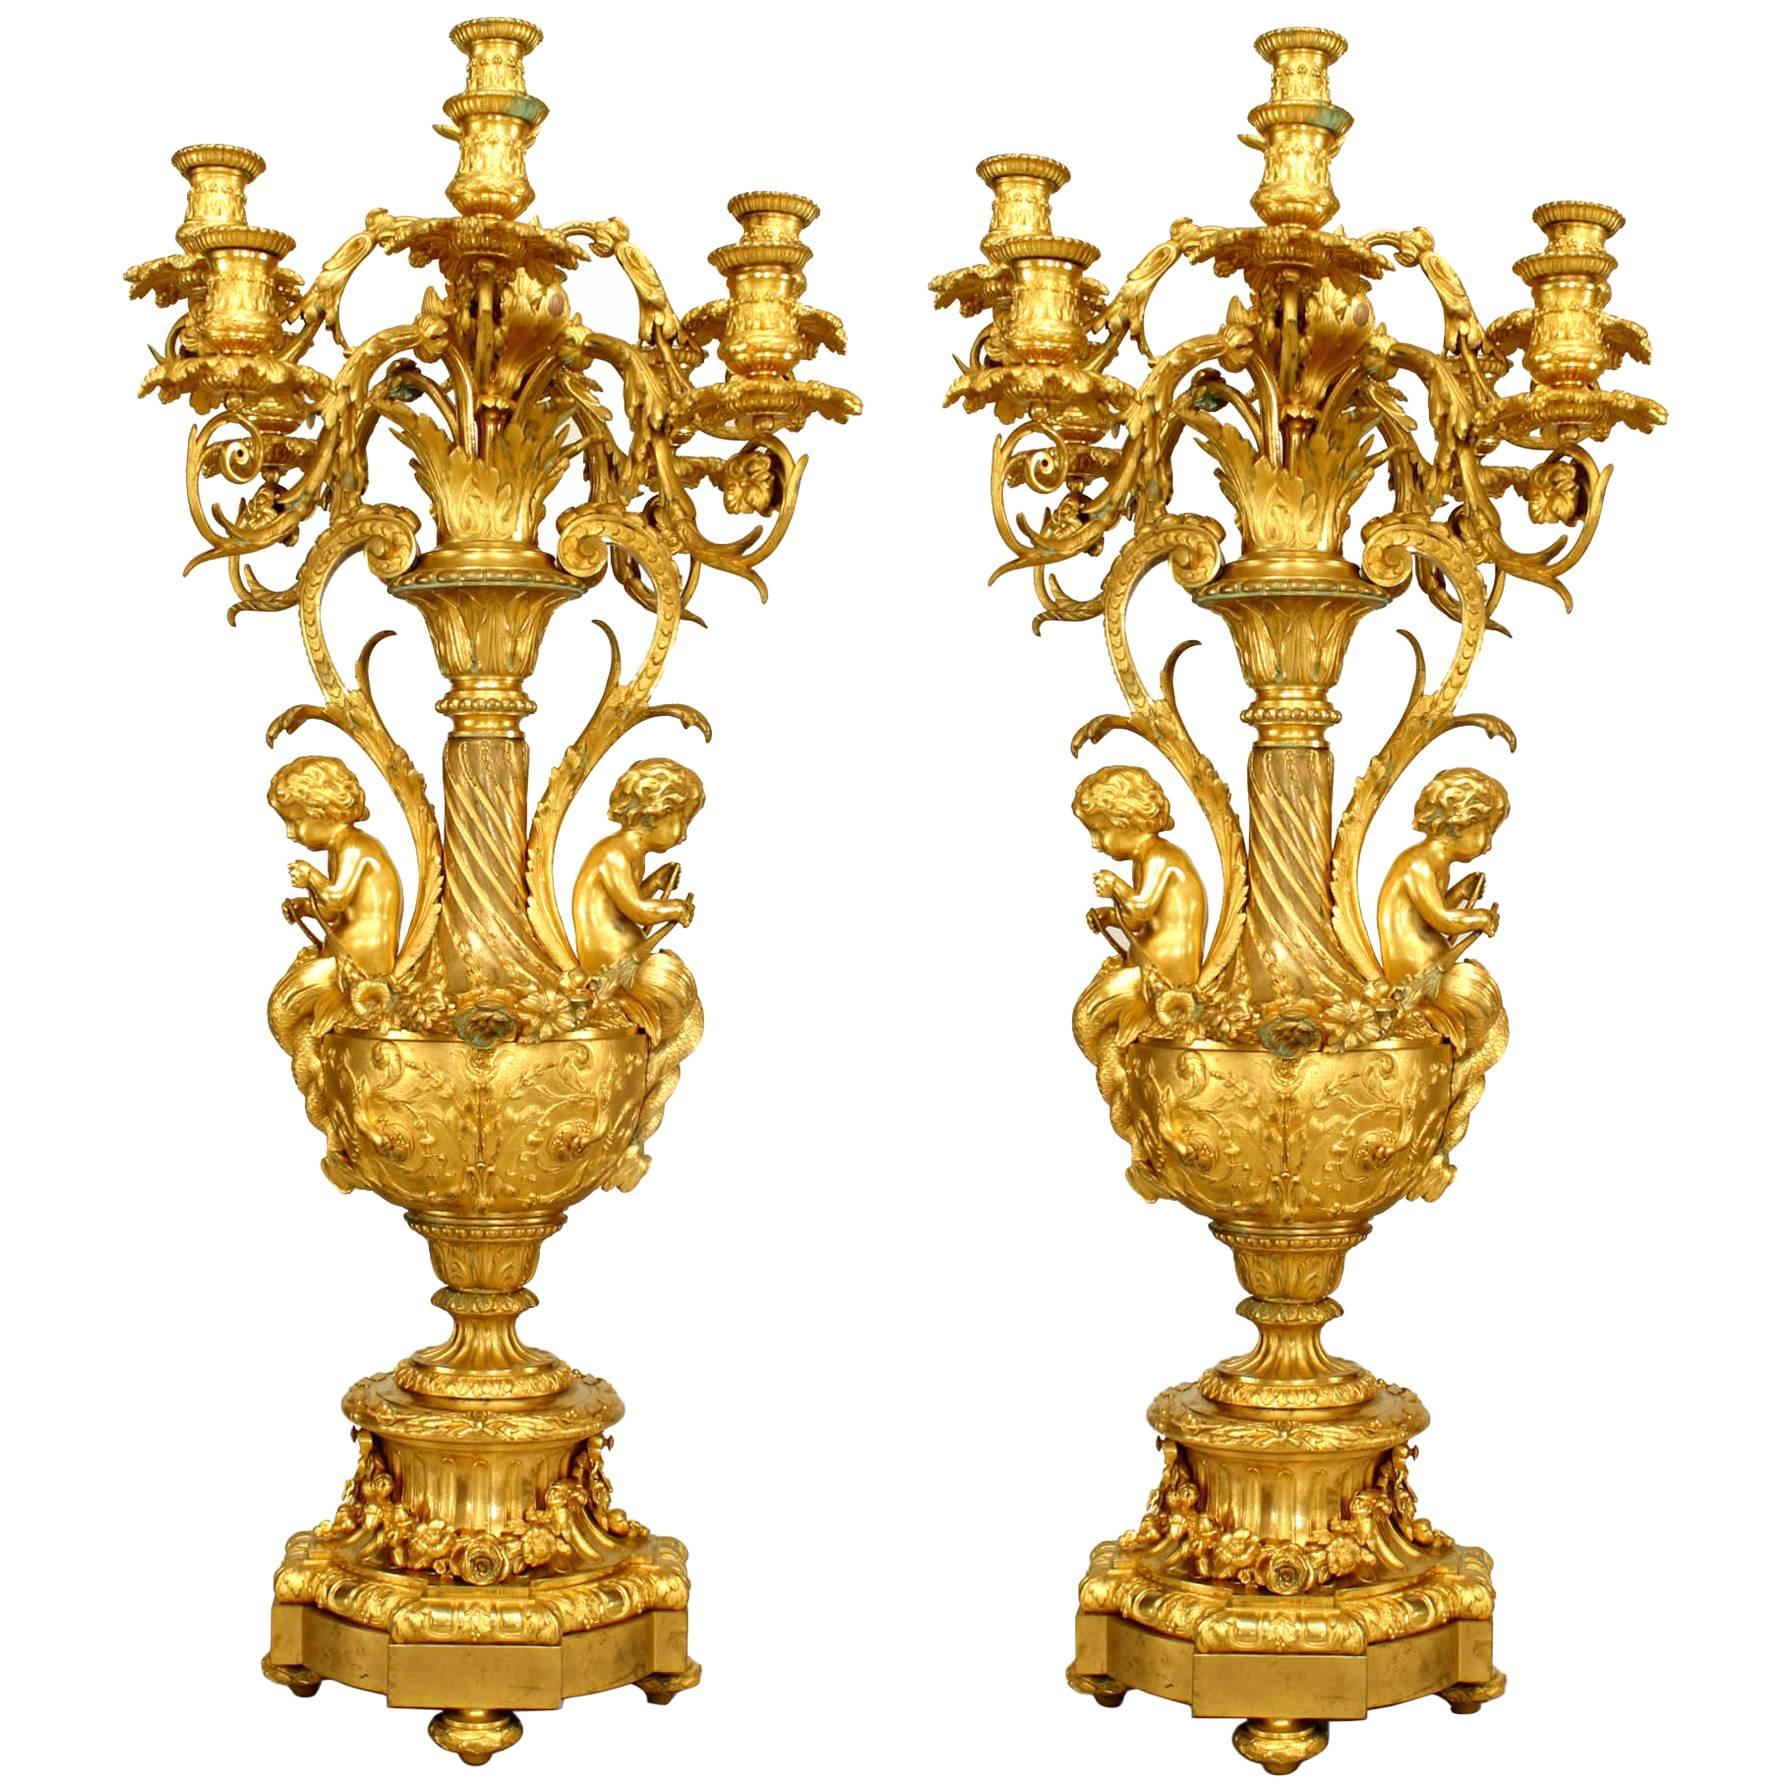 Pair of French Louis XV Bronze Dore Urn Candelabras